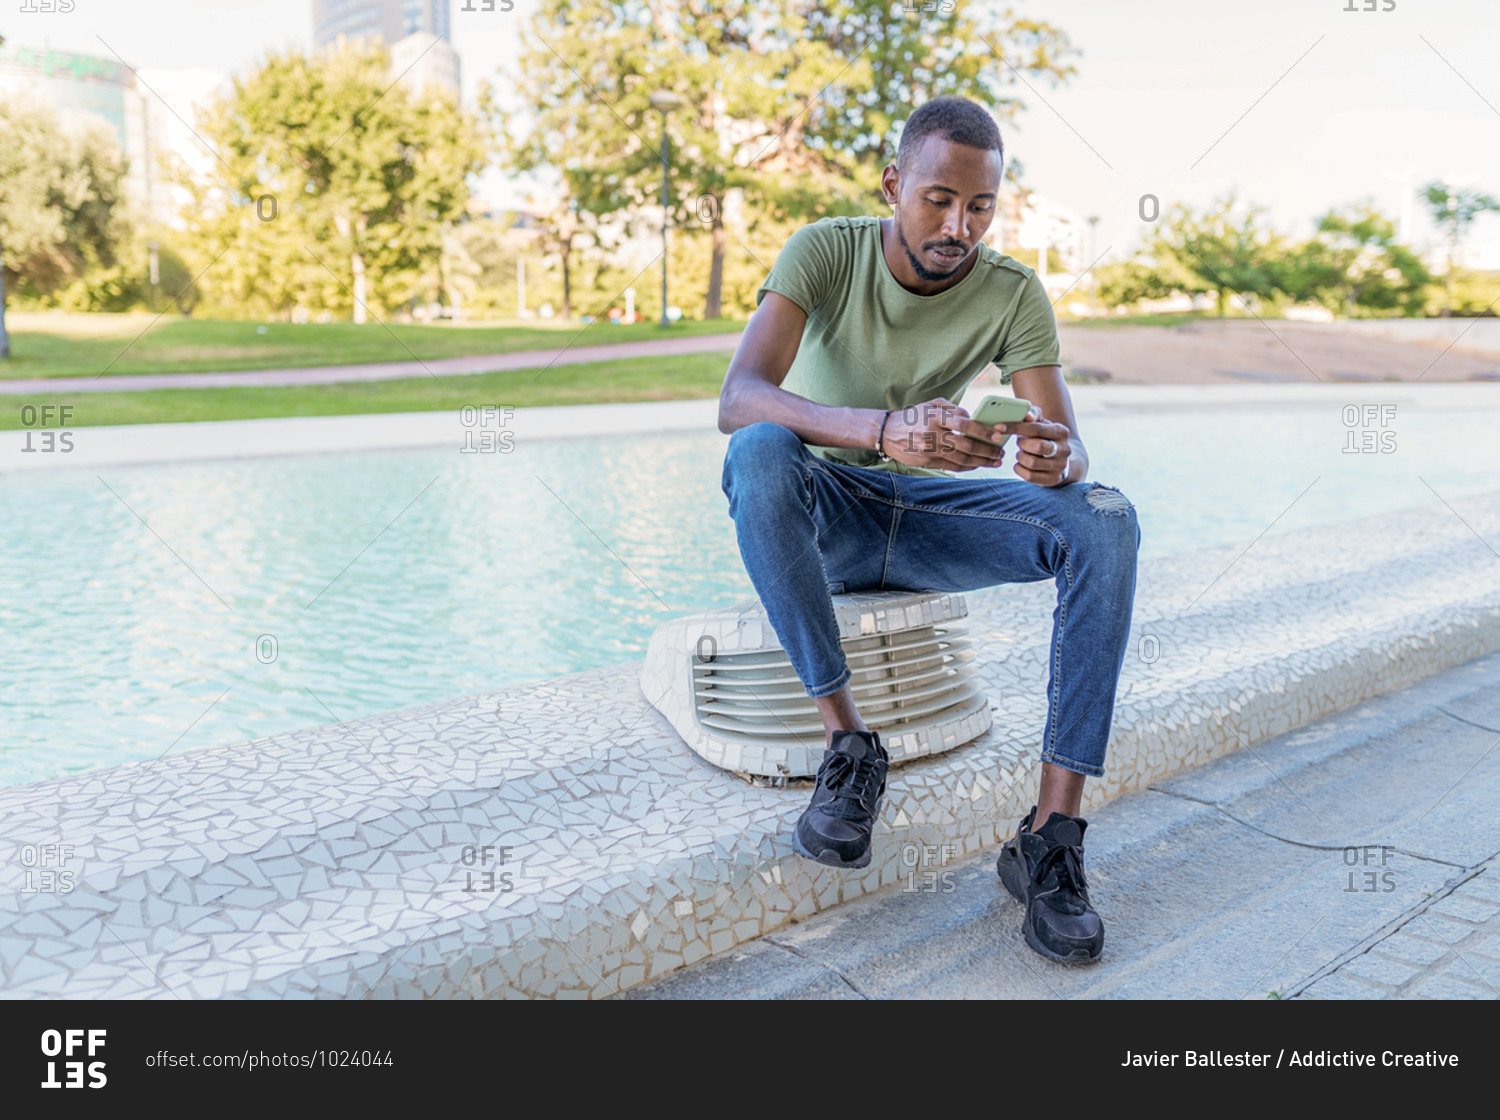 Pensive African American male sitting on border near fountain in city and surfing Internet on smartphone while chilling during